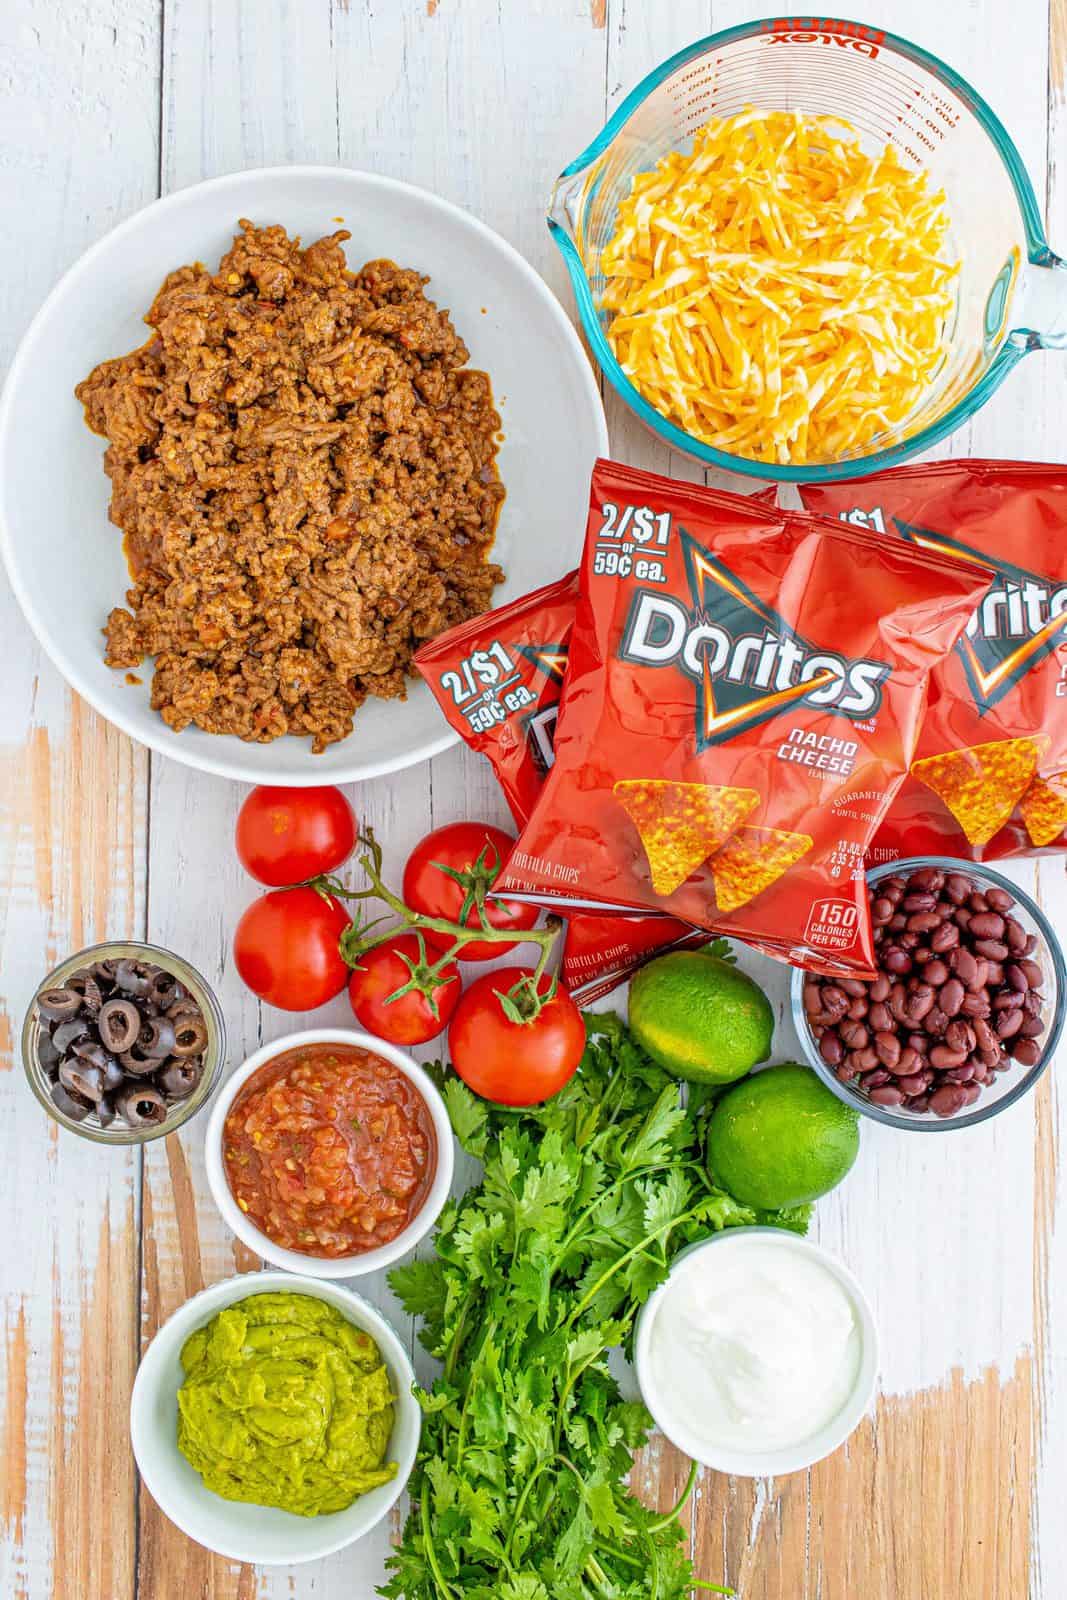 Ingredients needed: Doritos, seasoned taco meat, black beans, Colby Jack cheese and your Favorite Taco Toppings